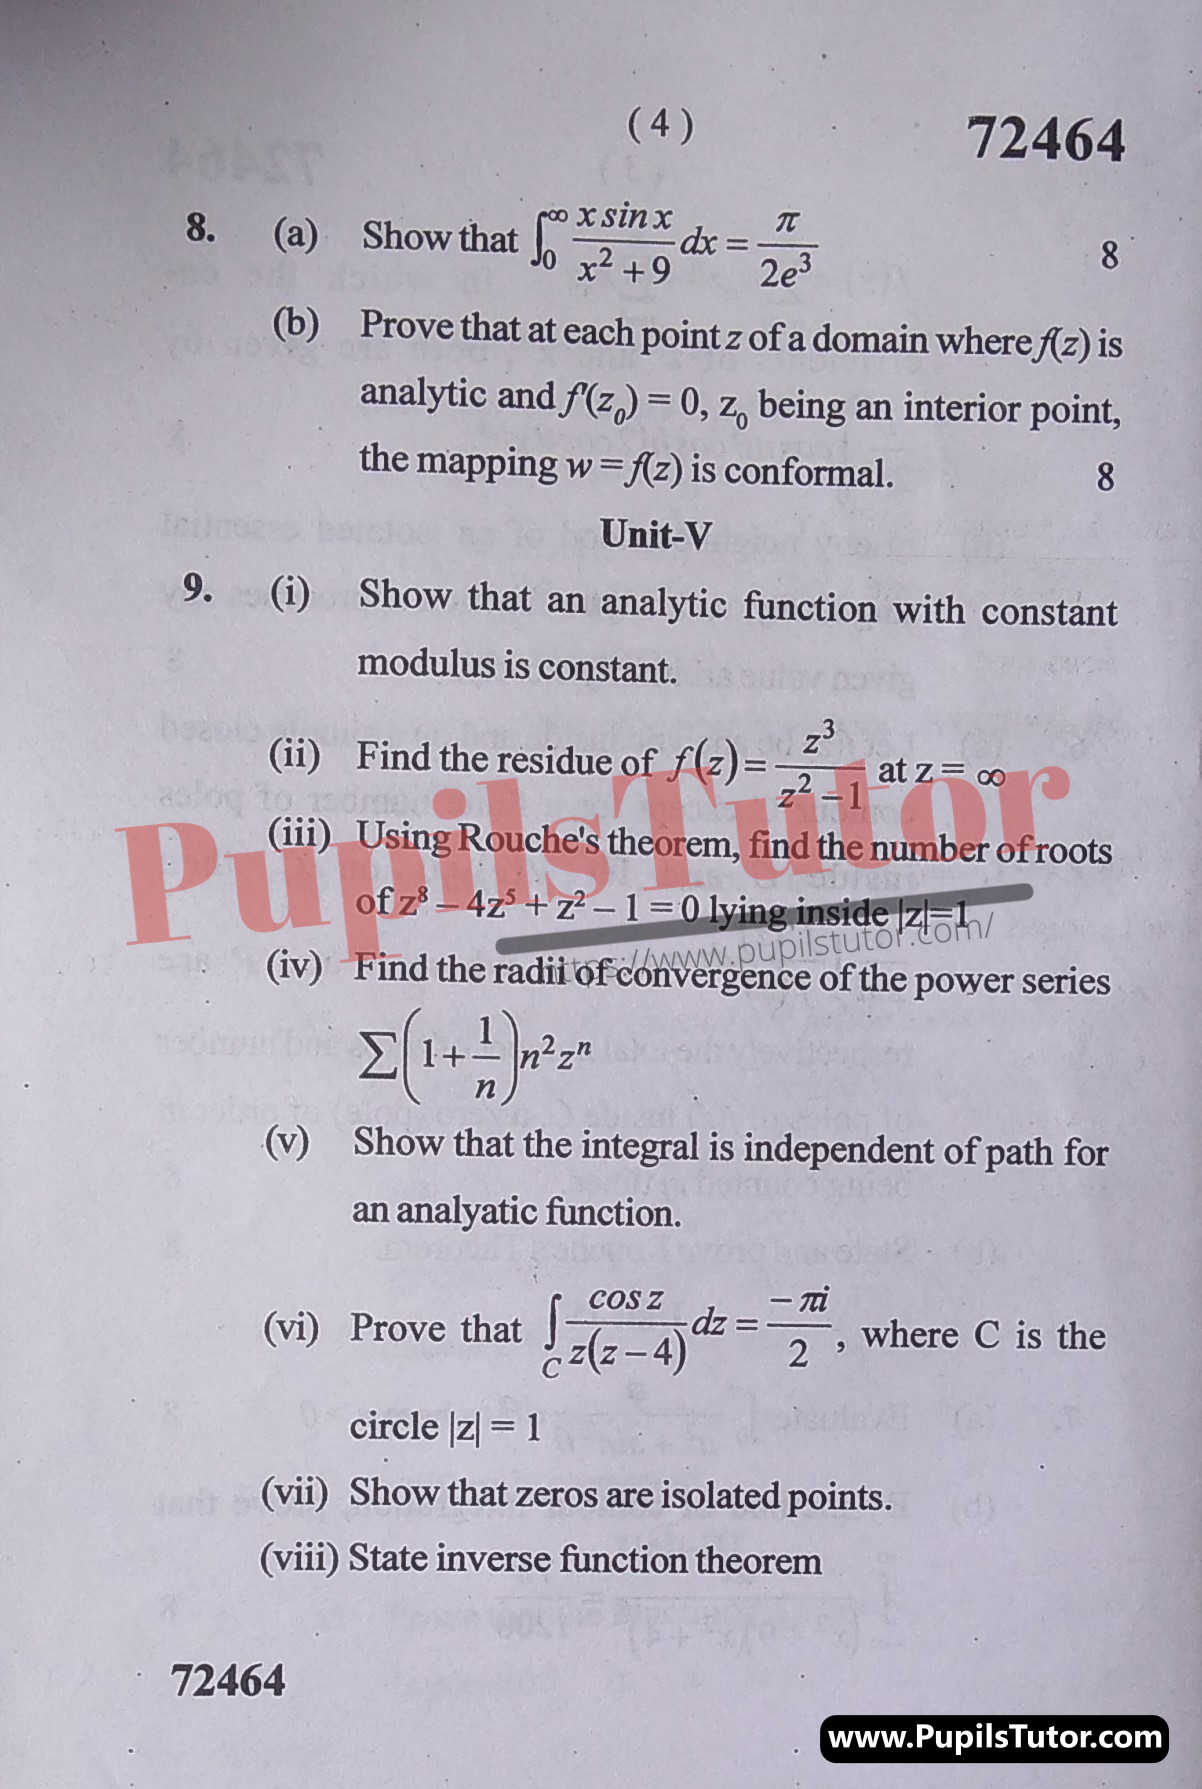 MDU (Maharshi Dayanand University, Rohtak Haryana) CBCS Scheme (M.Sc. [Mathematics] – Master of Science) Complex Analysis Important Questions Of March, 2022 Exam PDF Download Free (Page 4)